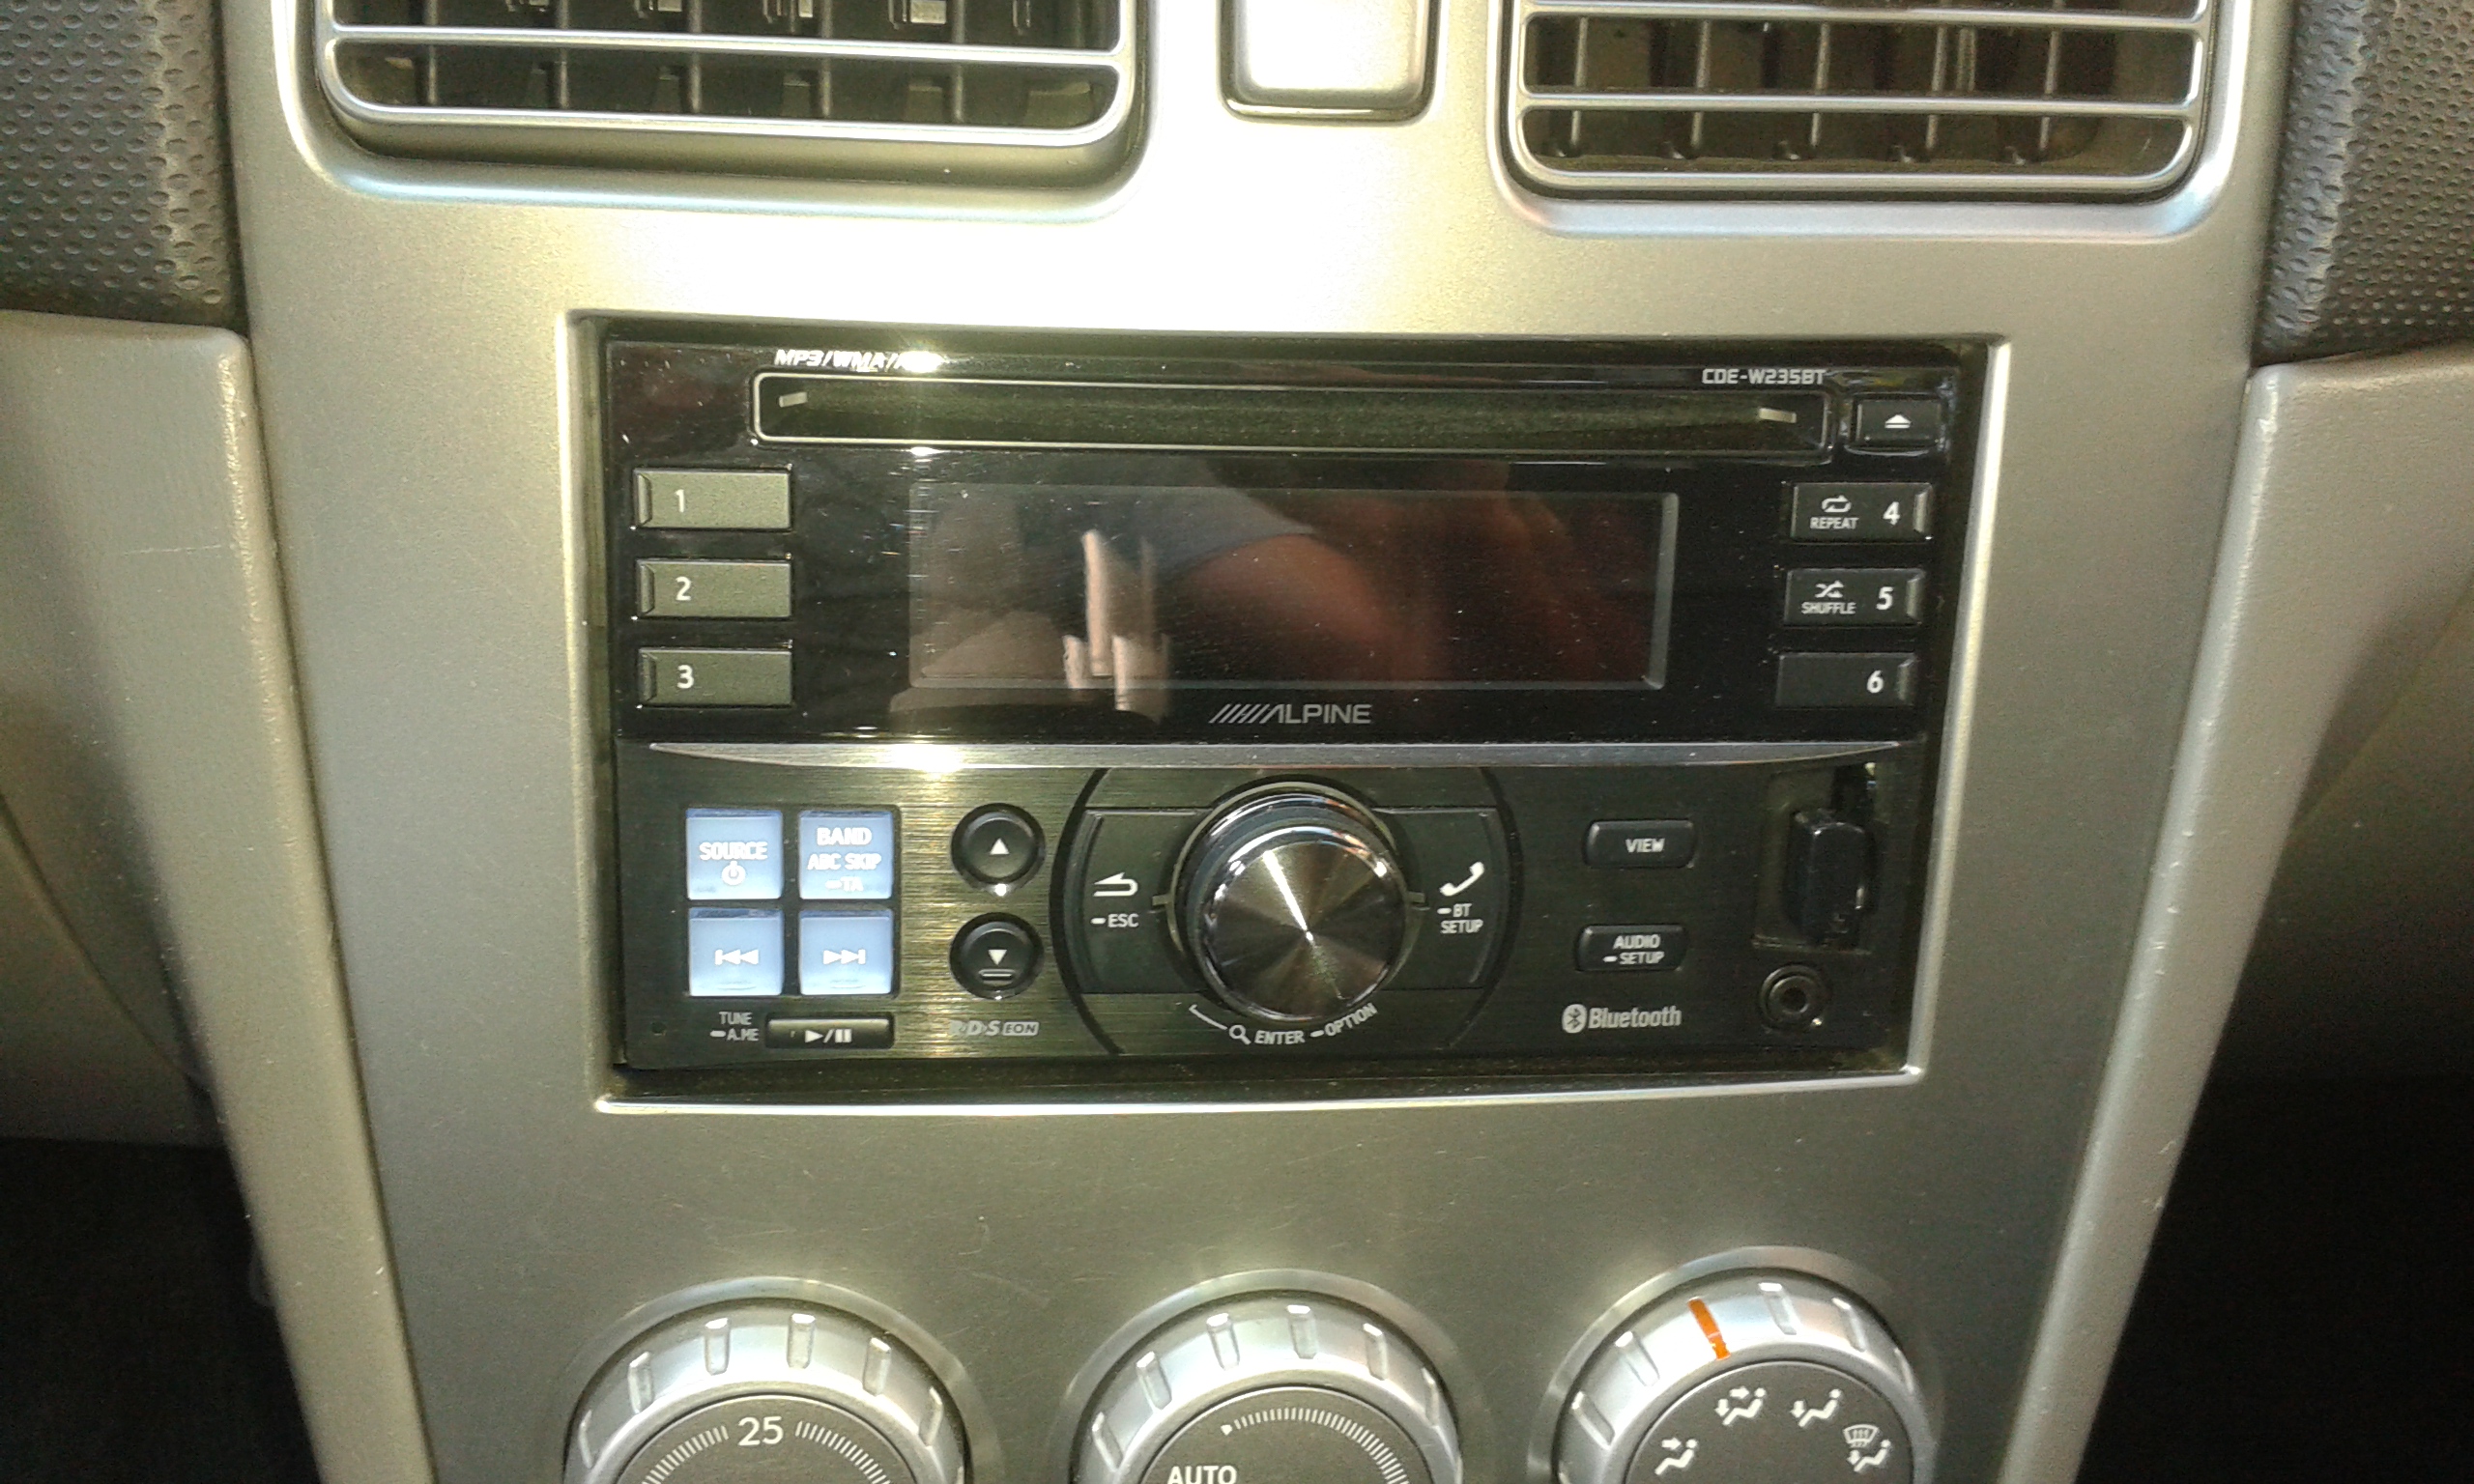 Forester Ii Radio Fabryczne - Forester - Forum Sip